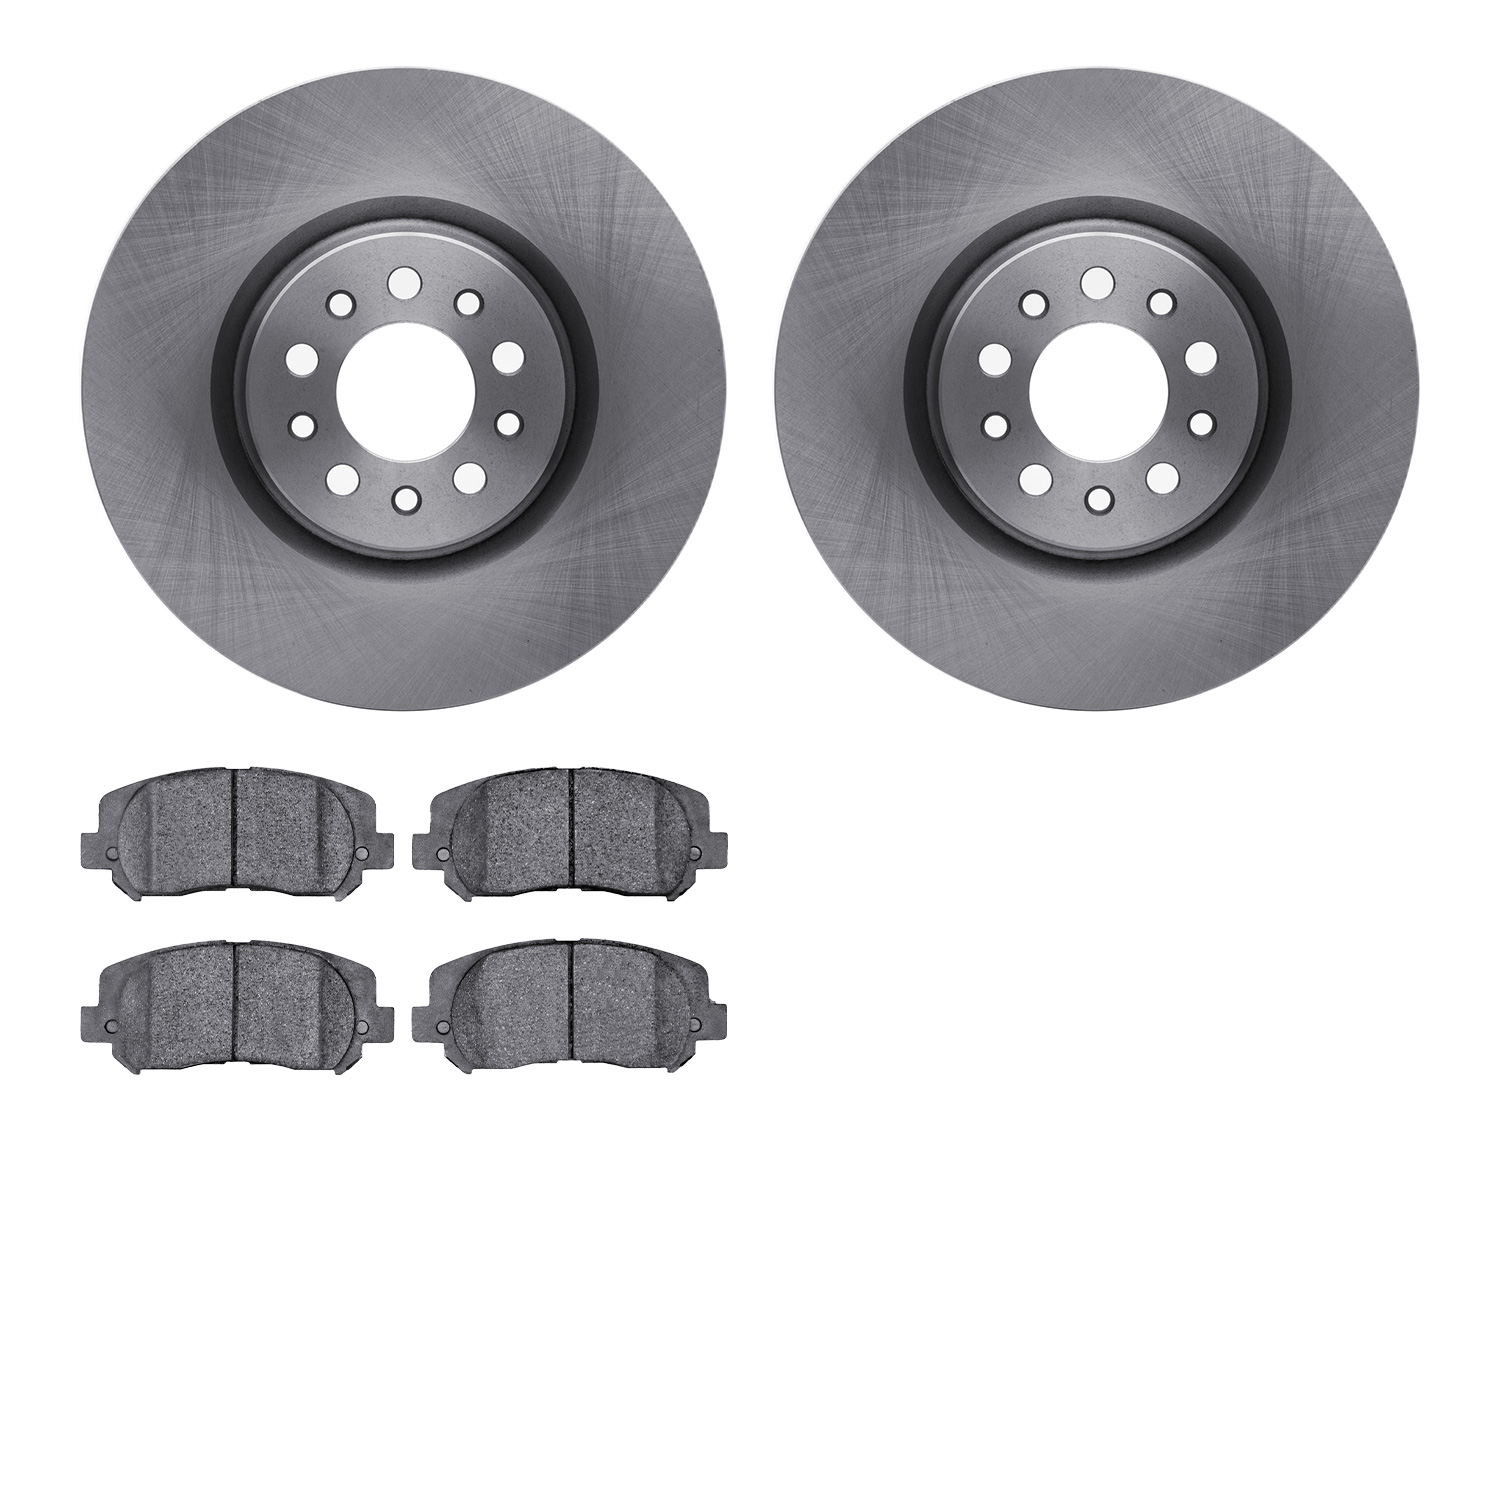 6402-42040 Brake Rotors with Ultimate-Duty Brake Pads, Fits Select Mopar, Position: Front